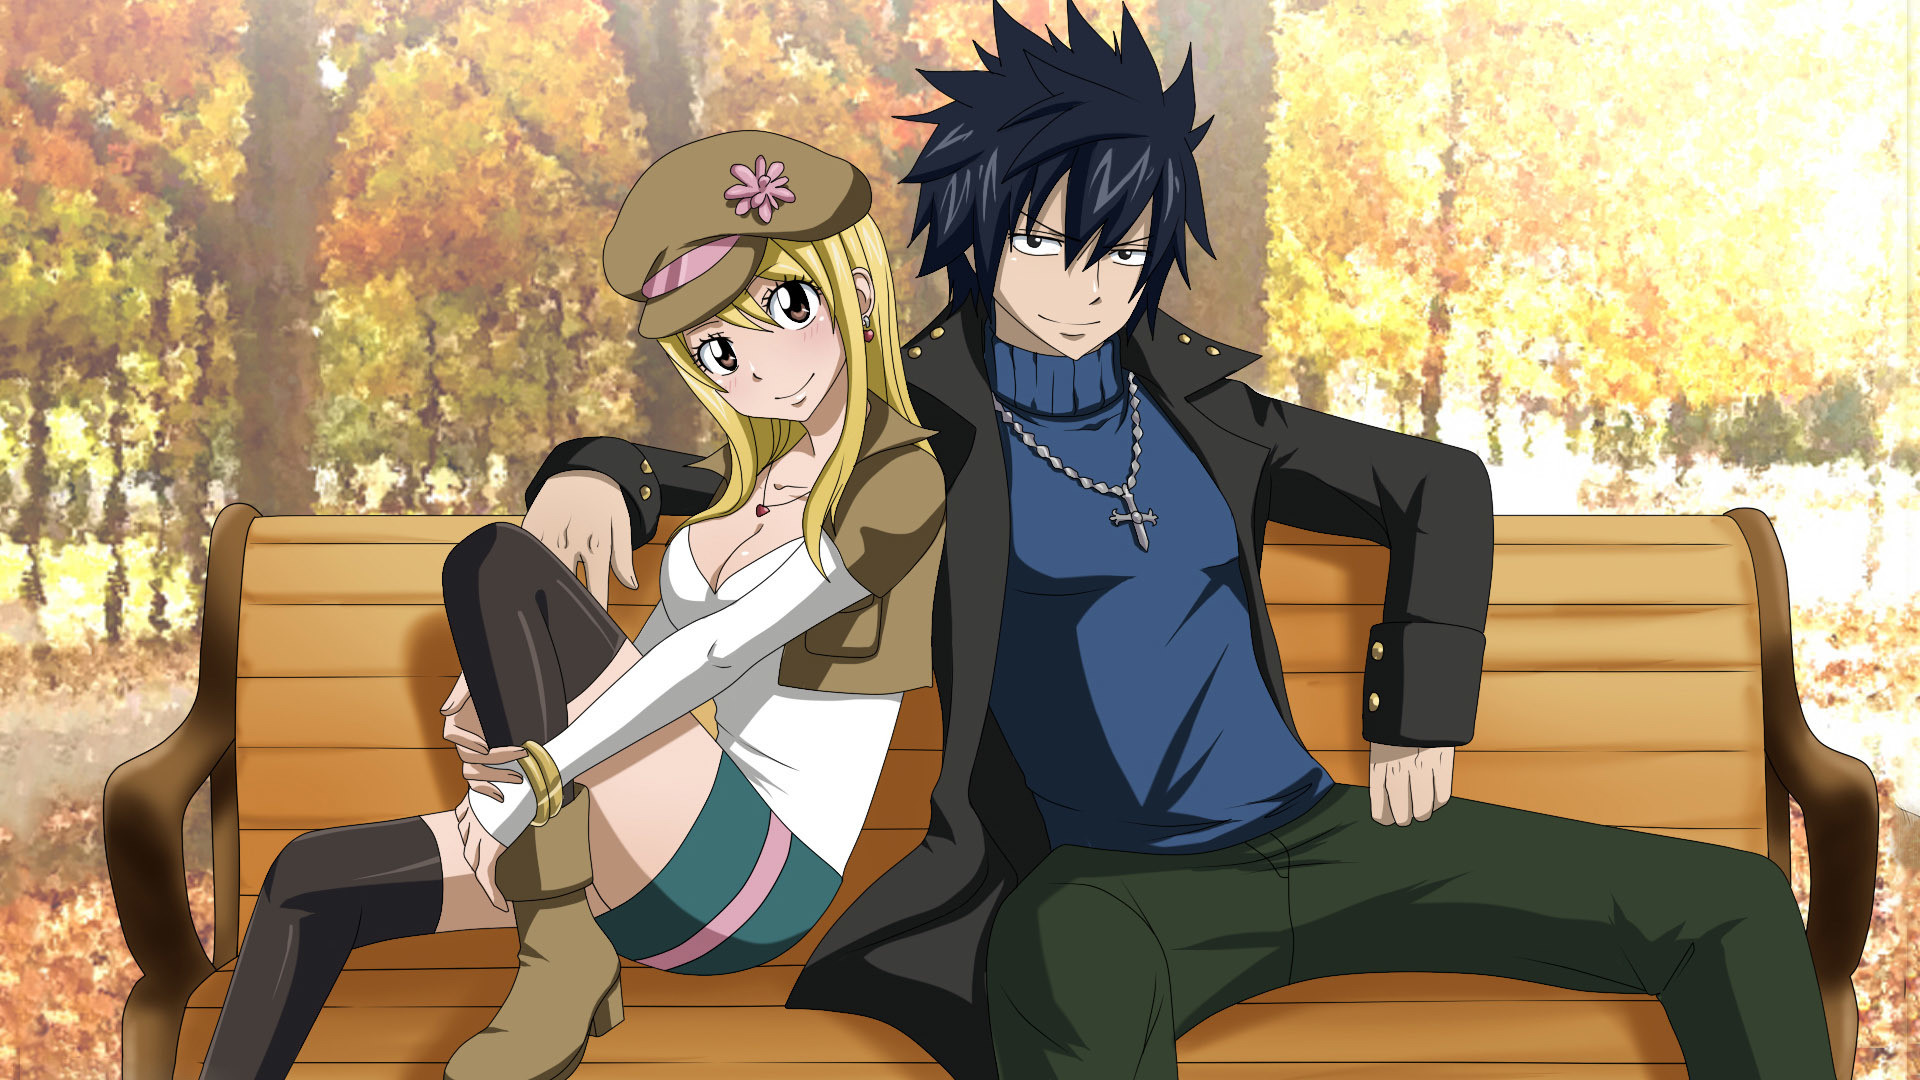 1920x1080 Gray Fullbuster and Lucy Heartfilia - Fairy Tail HD Wallpaper 